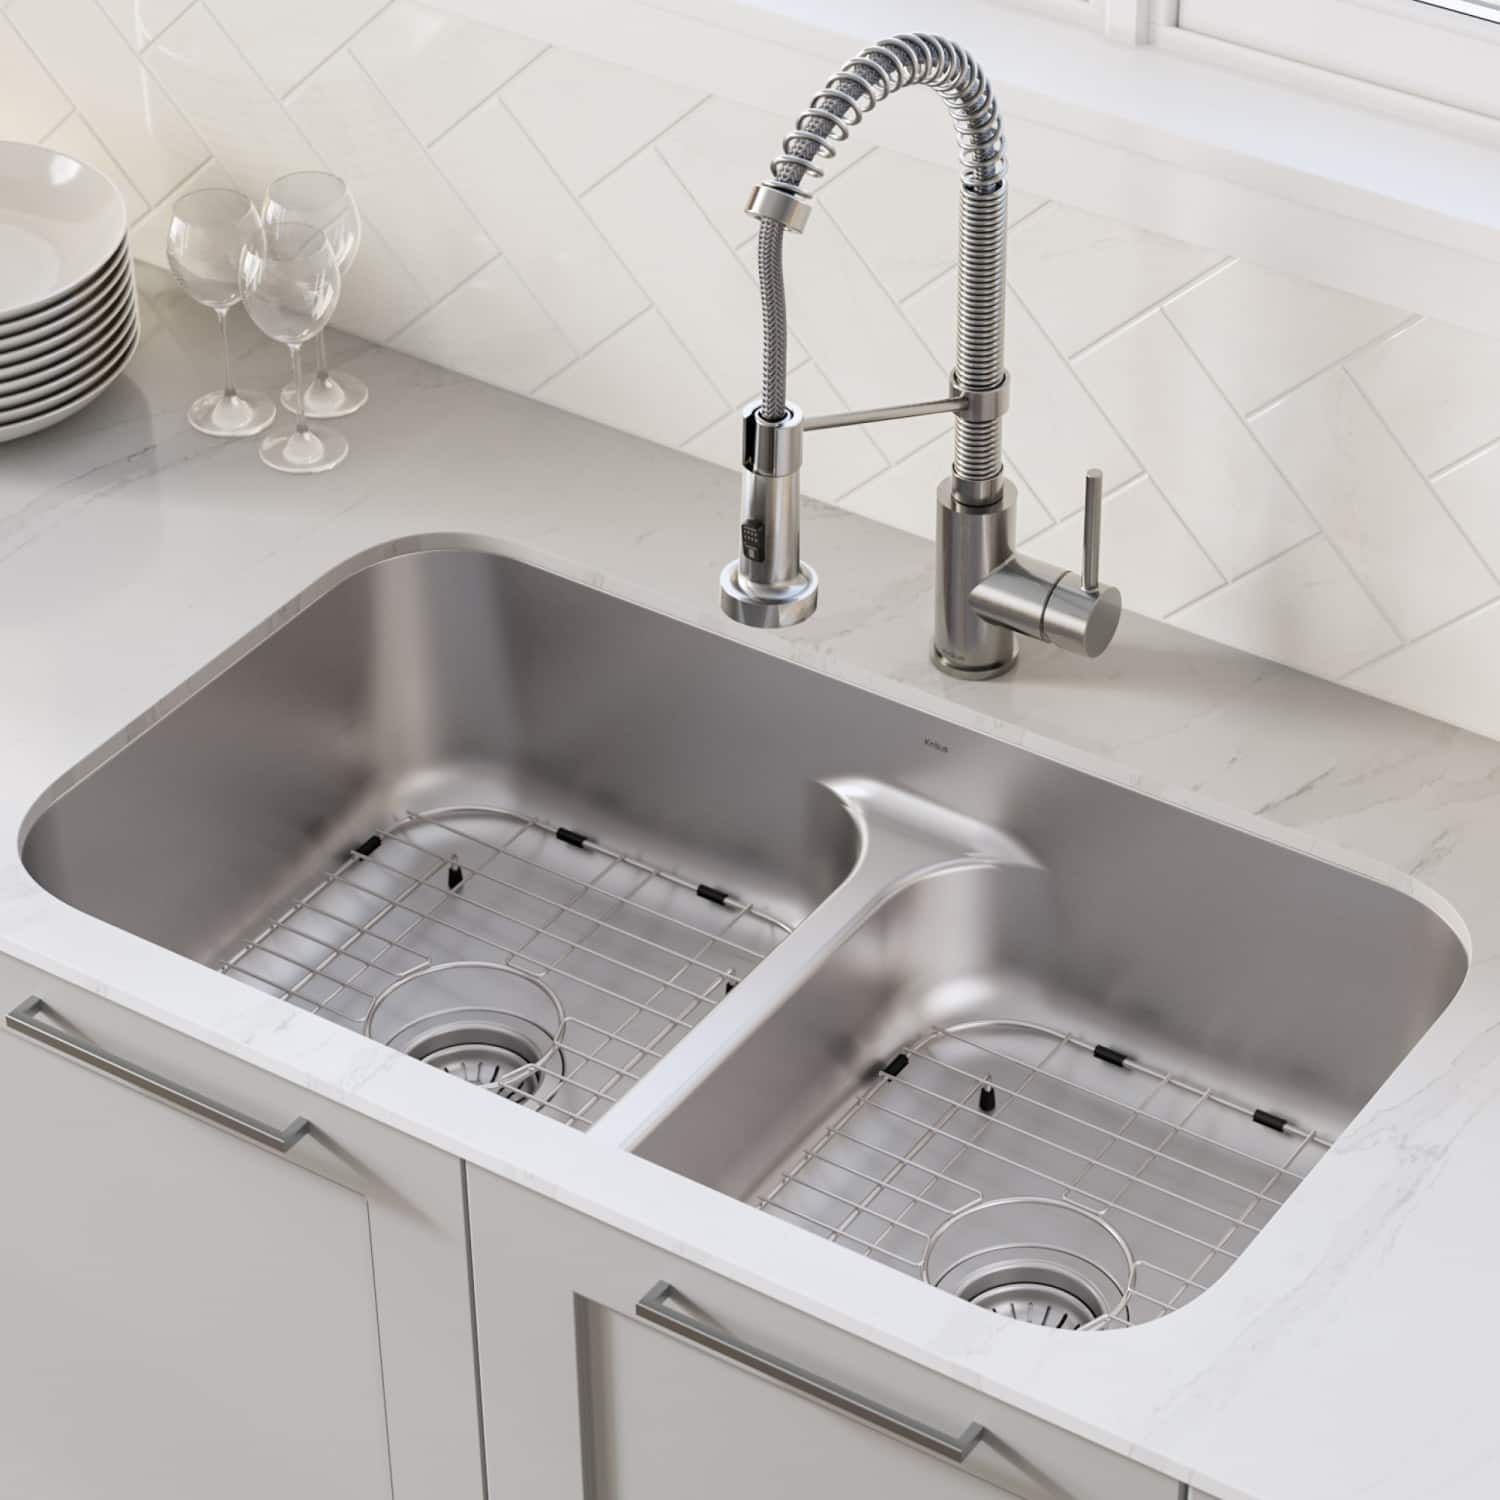 Image for Stainless Steel Kitchen Sinks